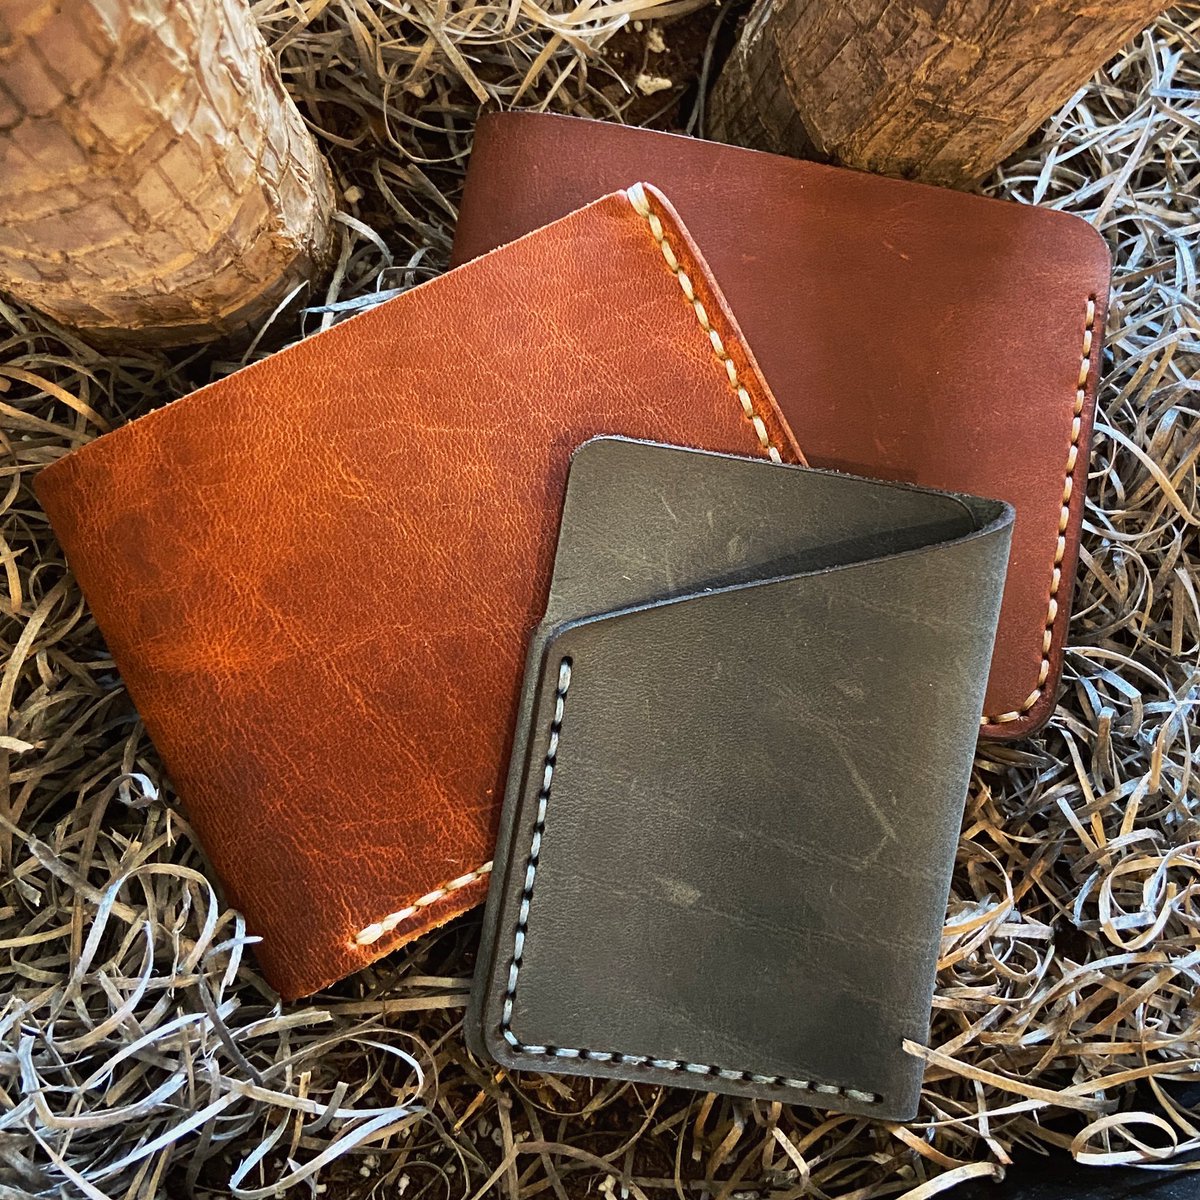 Our handmade wallets are always stitched by hand using the saddle stitch method for maximum strength. And It always looks better than a machine stitch. #crimsonserpentsoutpost #handmade #wallets #madeintheusa🇺🇸 #saddlestitched